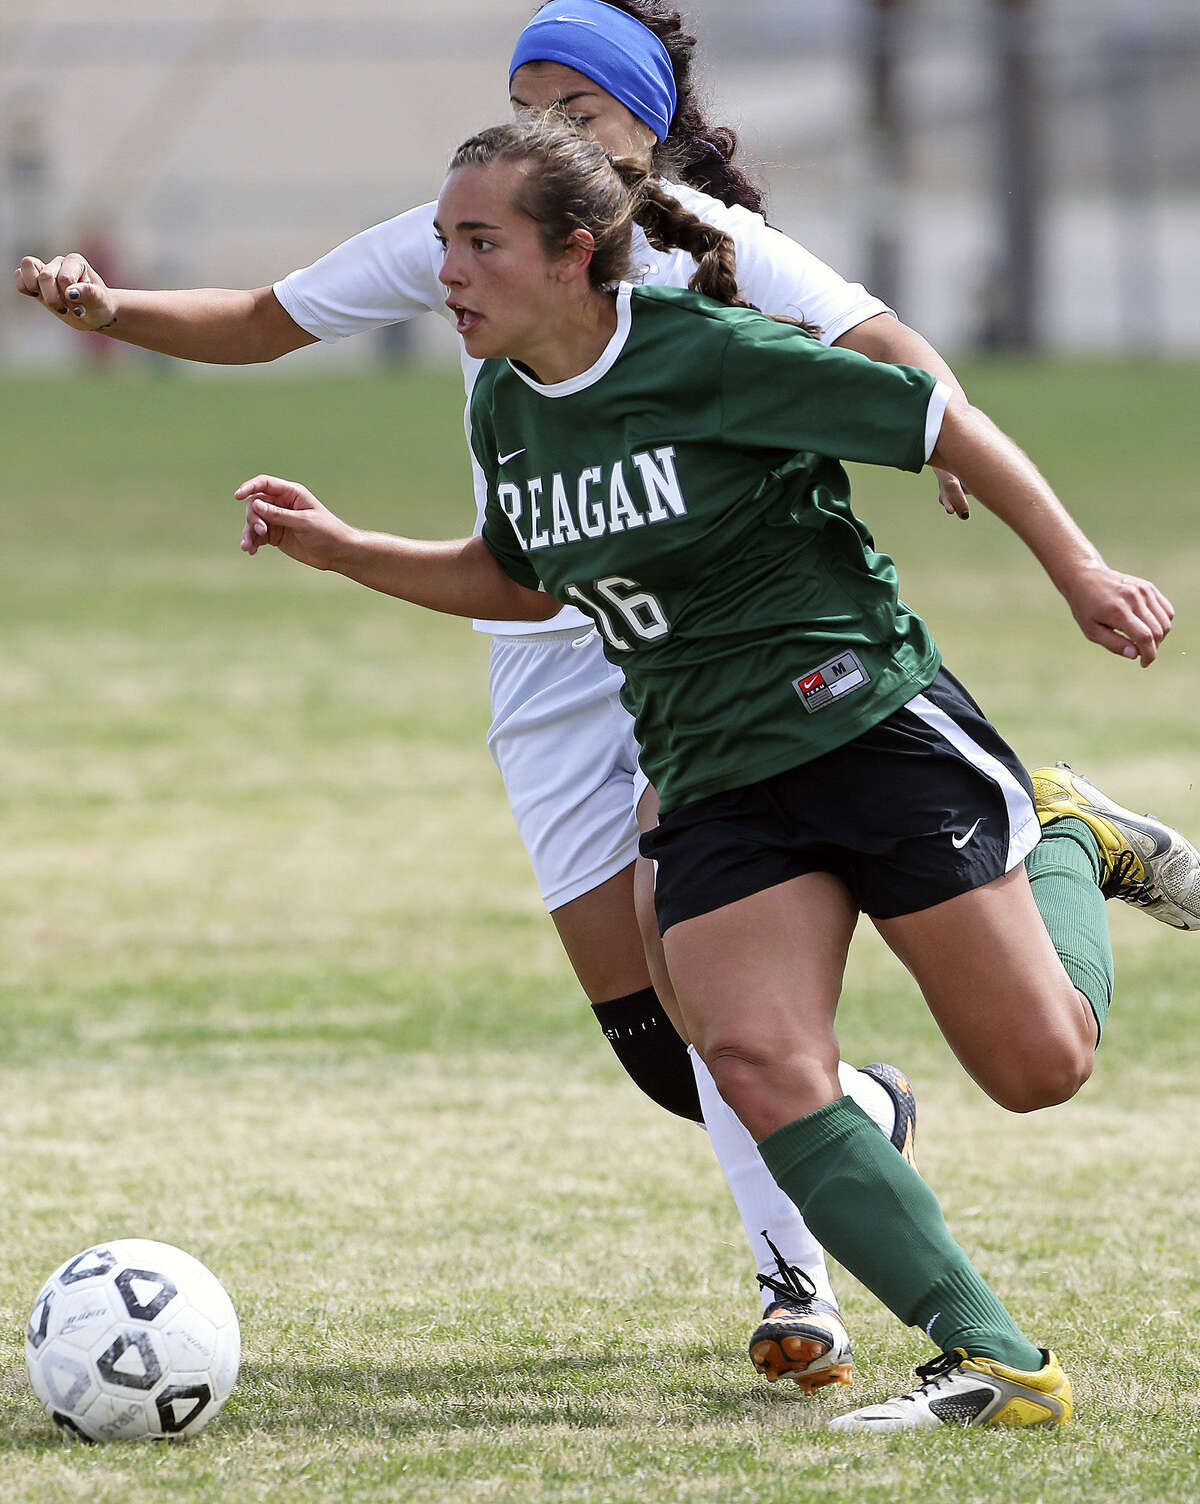 Nicole Galan (front) has been a vital member of Reagan's midfield contingent that has helped guide the Rattlers to today's Class 5A state semifinals in Georgetown.